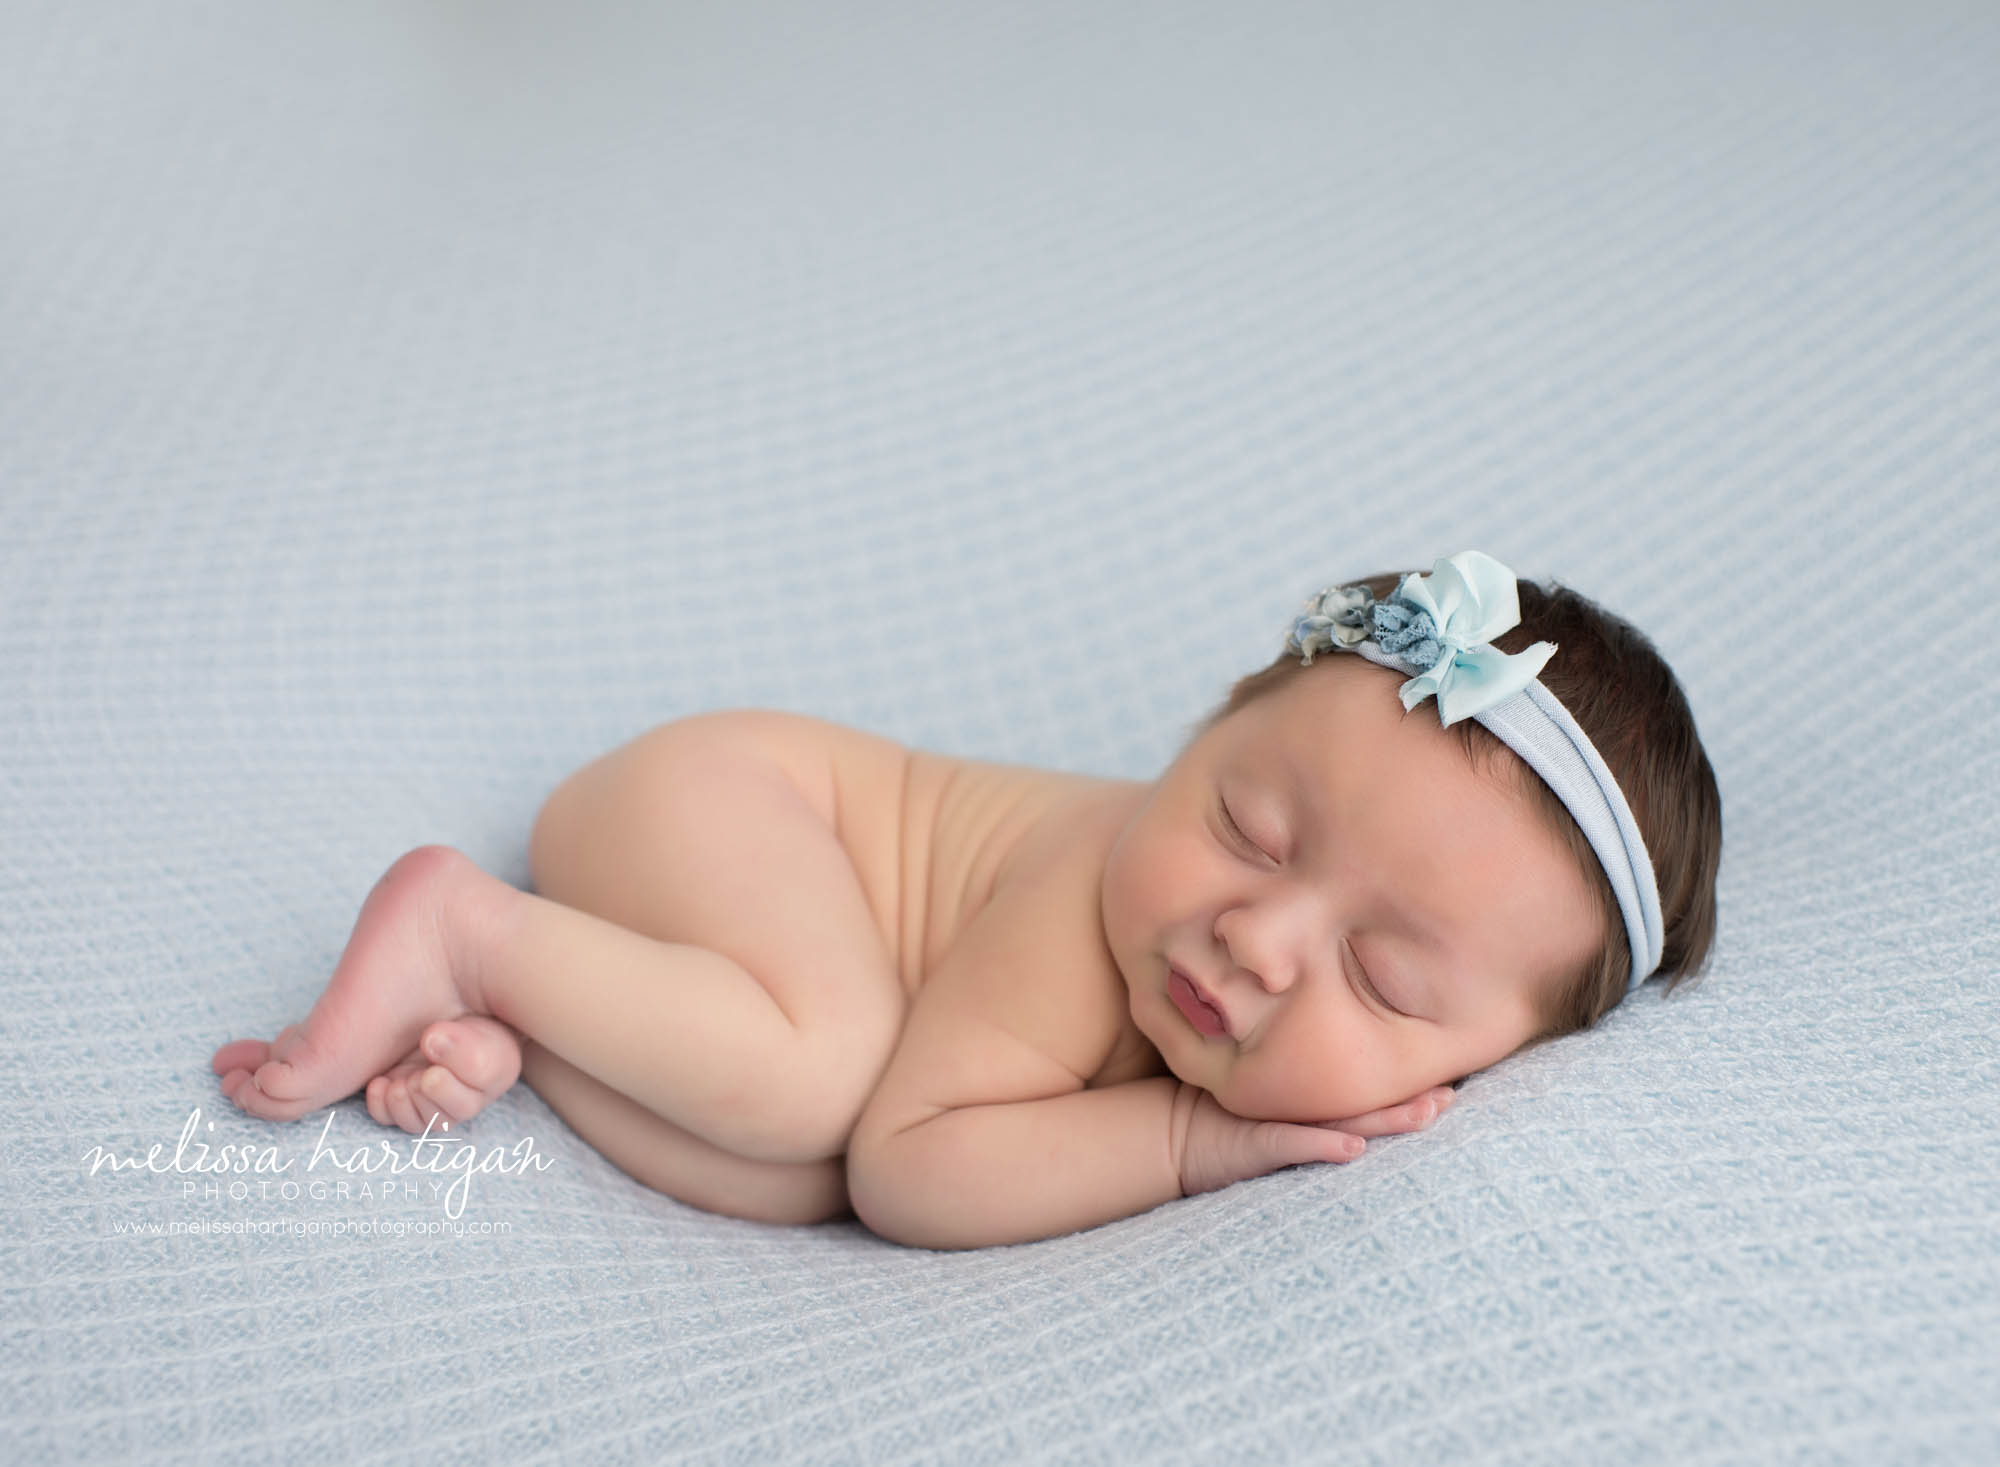 Leila CT Newborn Session baby girl sleeping on blue blanket with floral headband